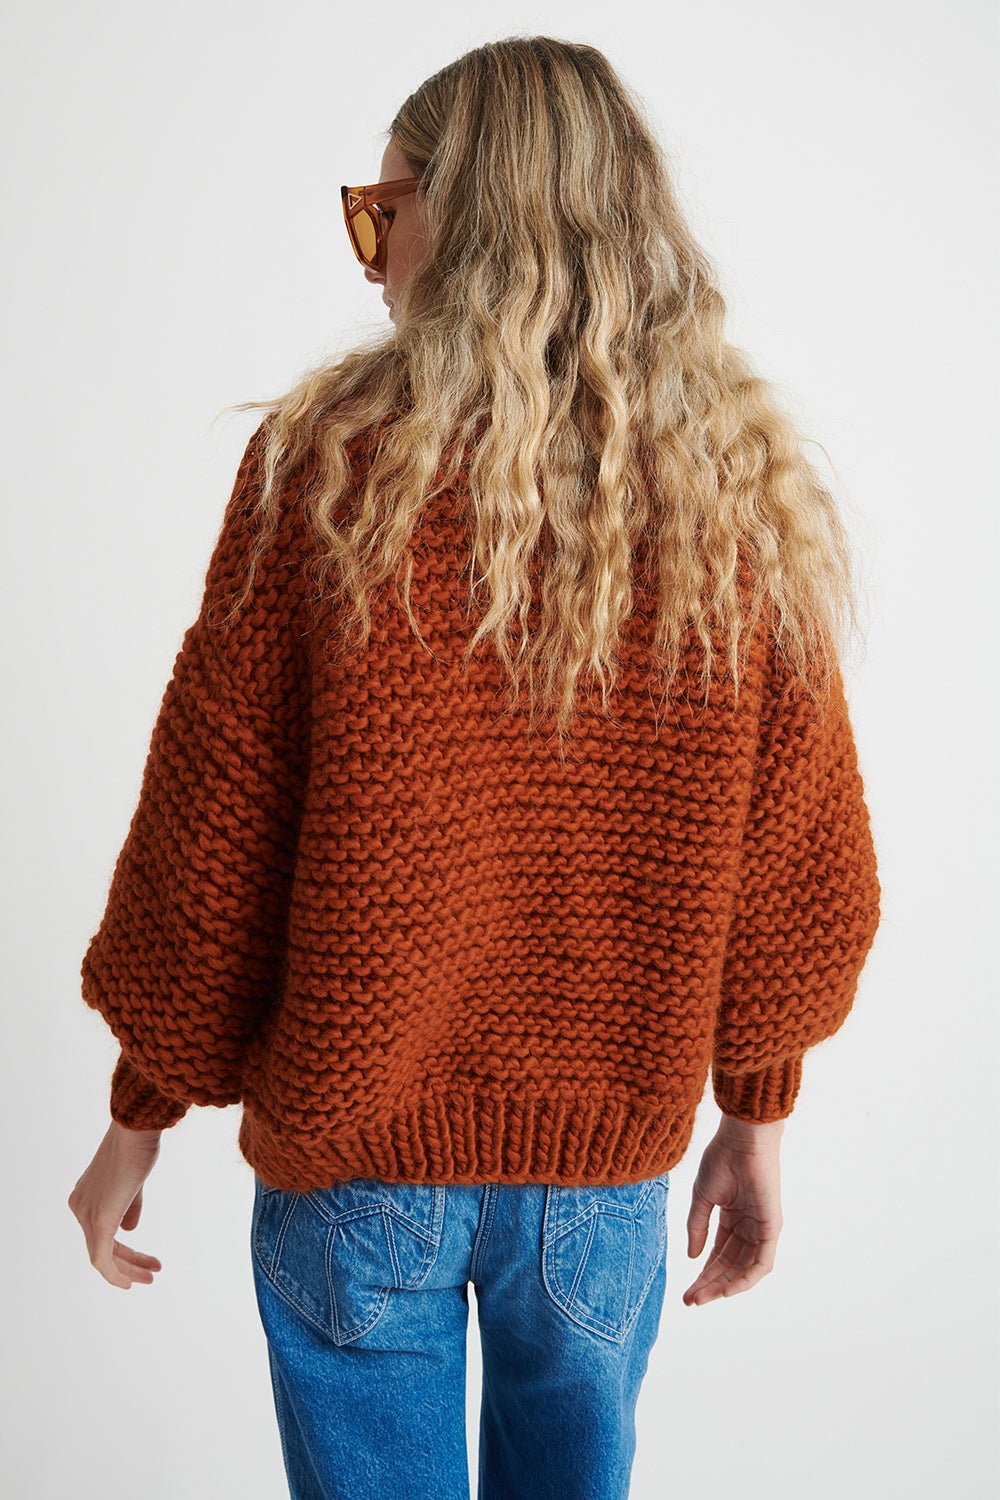 The Knitter Stardust Cardy